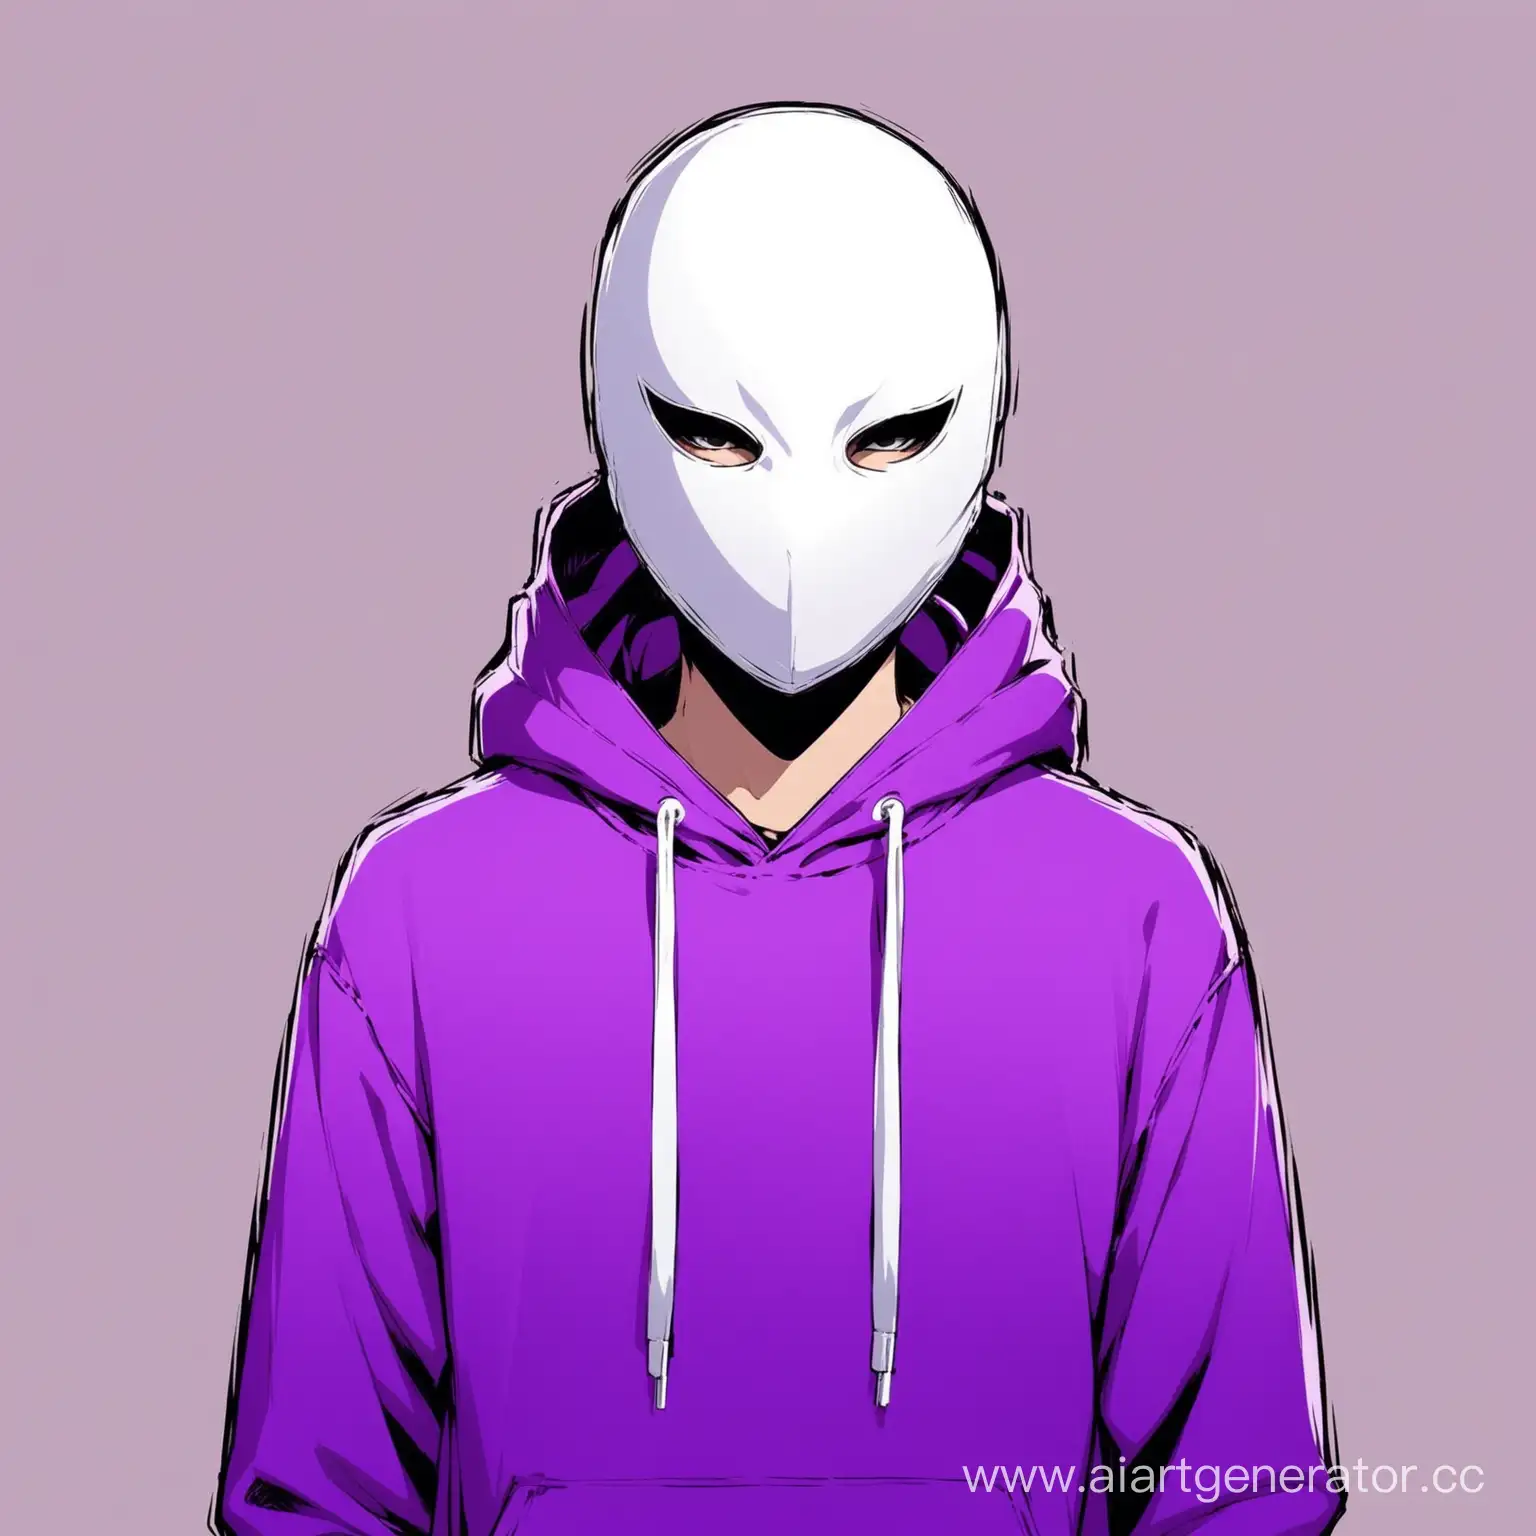 A character in a purple hoodie and a white mask
